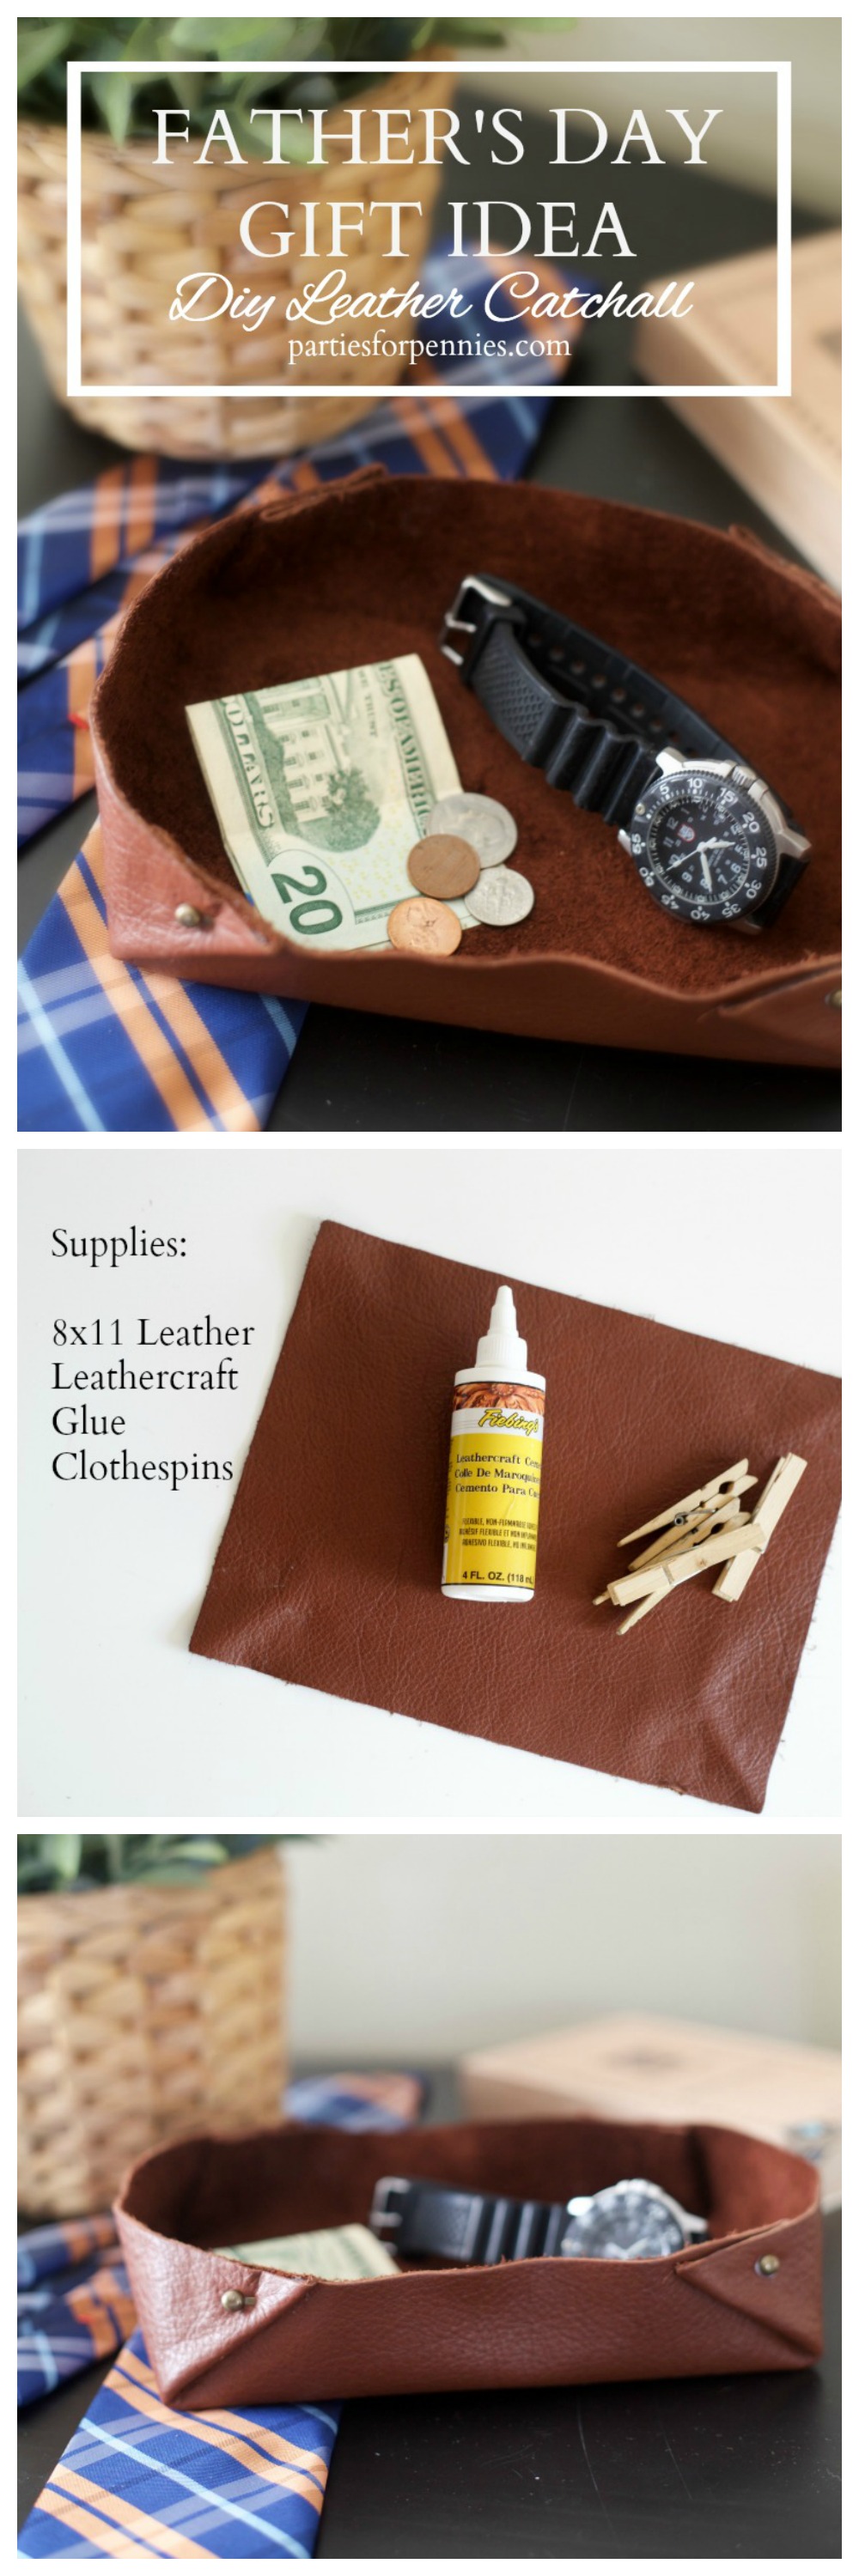 Father's Day DIY Gift Idea - DIY Leather Catchall or Tray | PartiesforPennies.com | DIY, Father's Day, GIft, Handmade, Leather